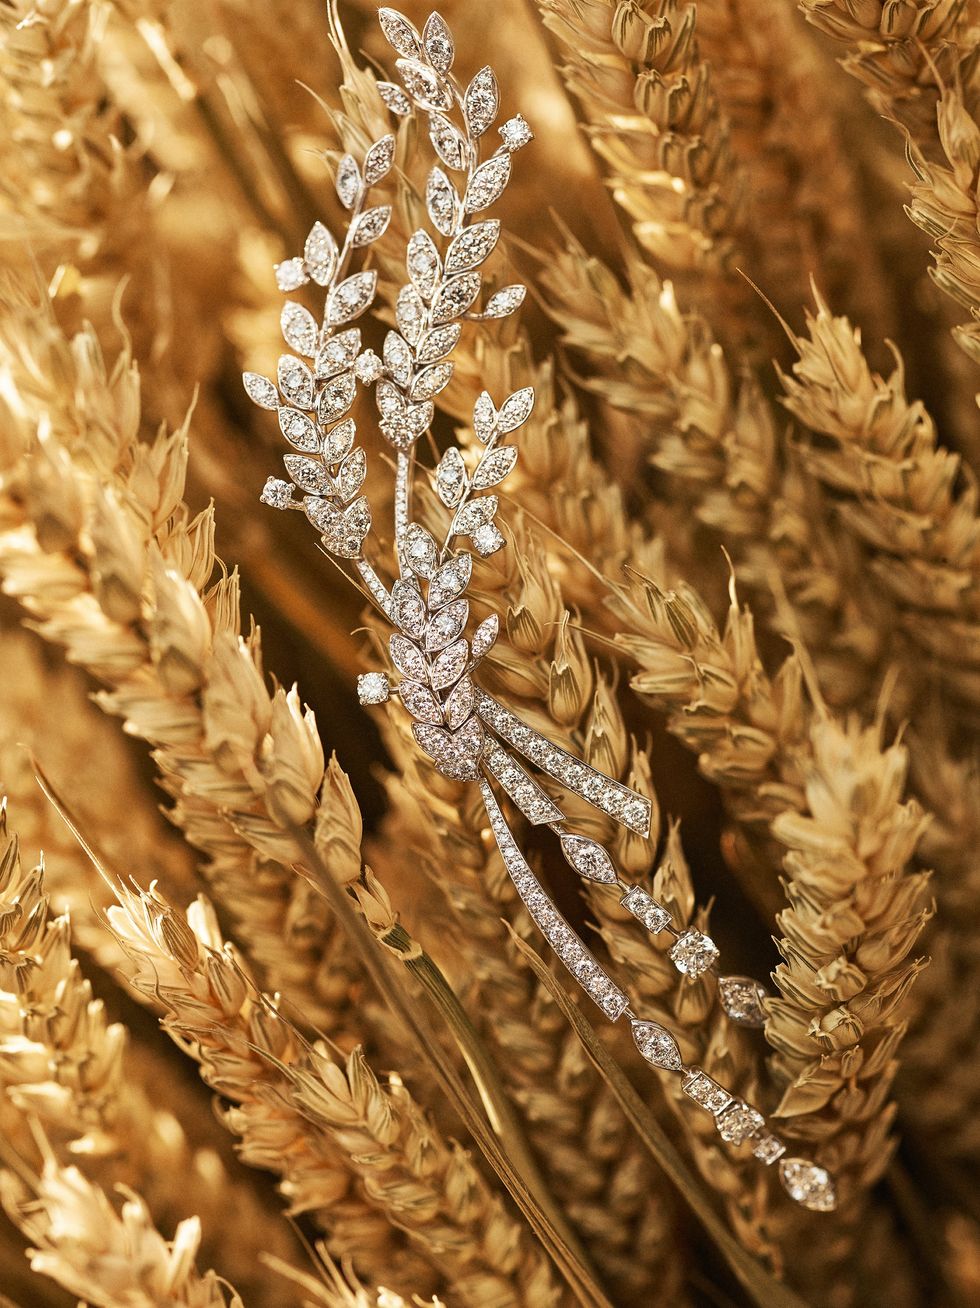 Brown, Agriculture, Flowering plant, Poales, Grass family, Wheat, Close-up, Terrestrial plant, Crop, Food grain, 